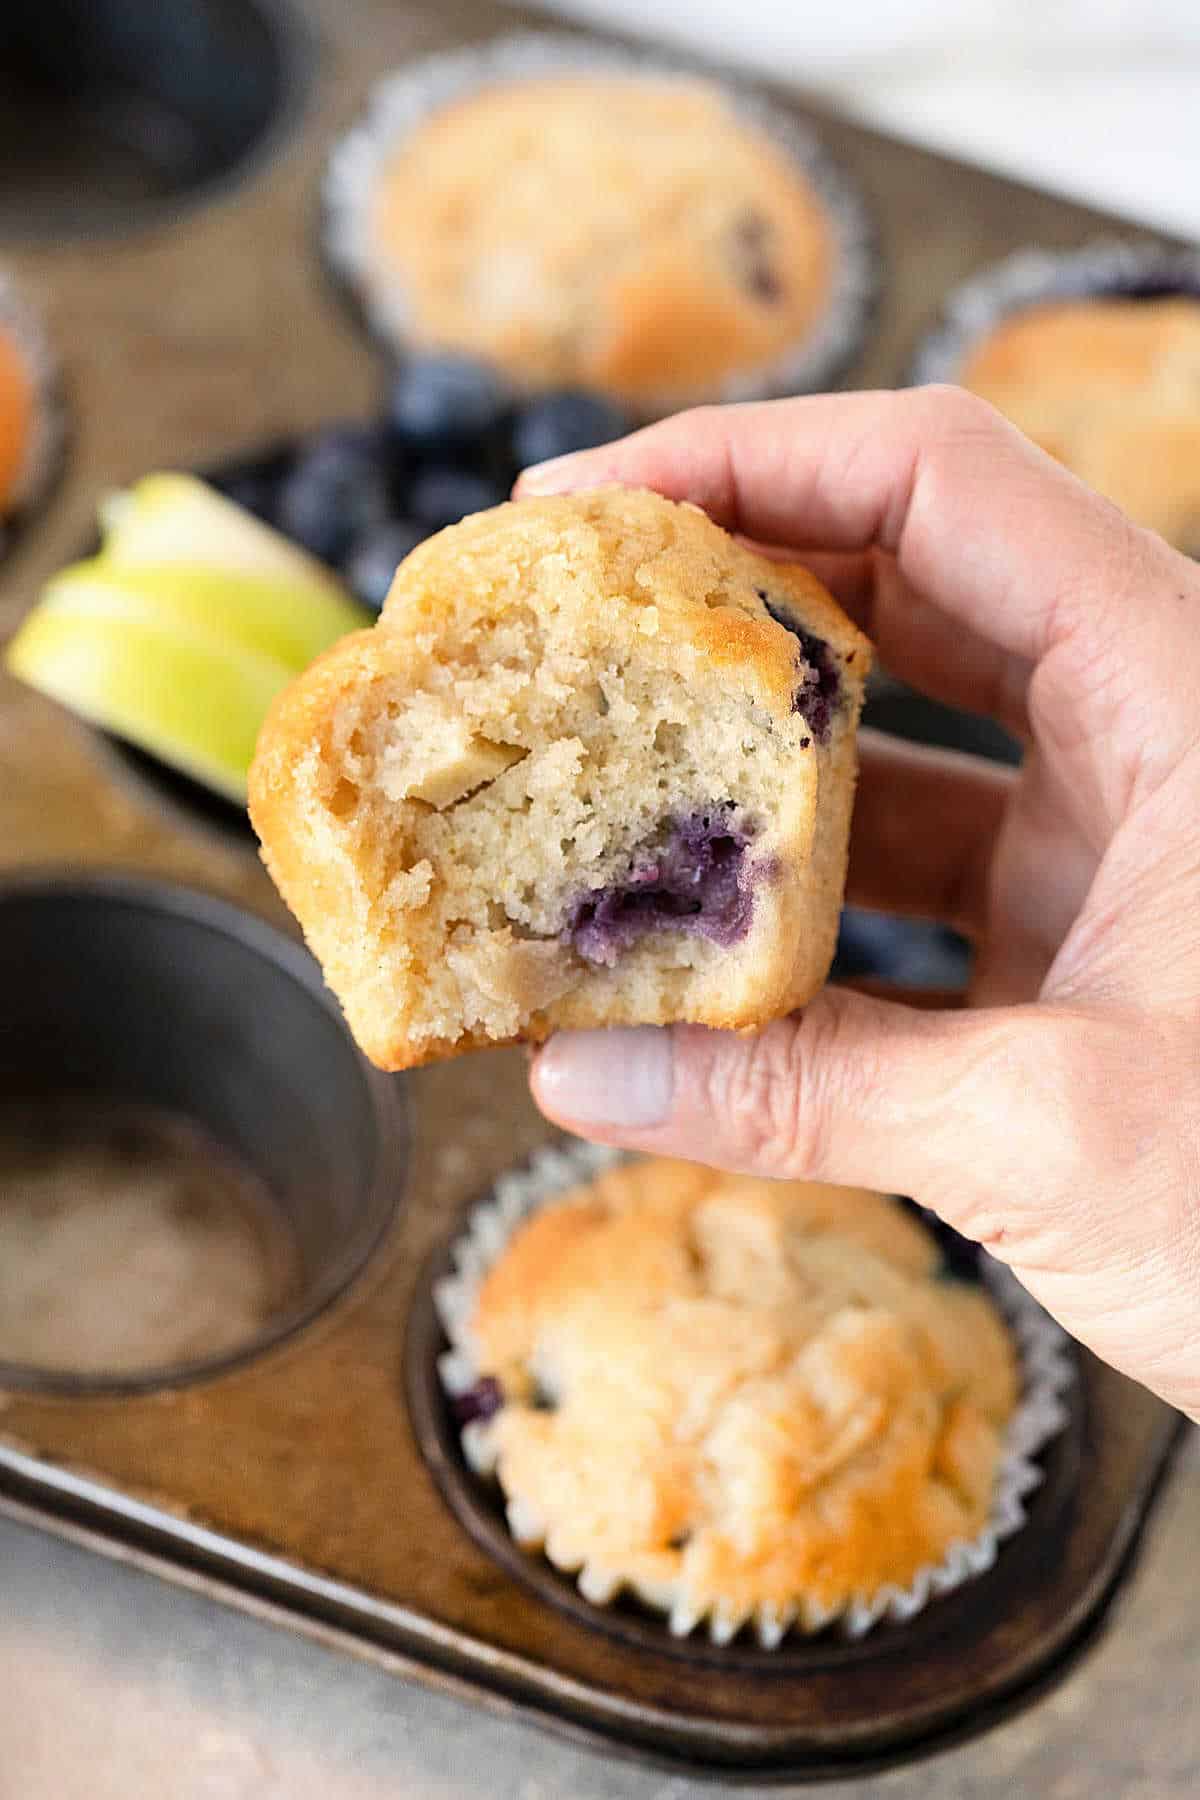 Eaten blueberry apple muffin being held over metal muffin tin with more muffins and fruit pieces.